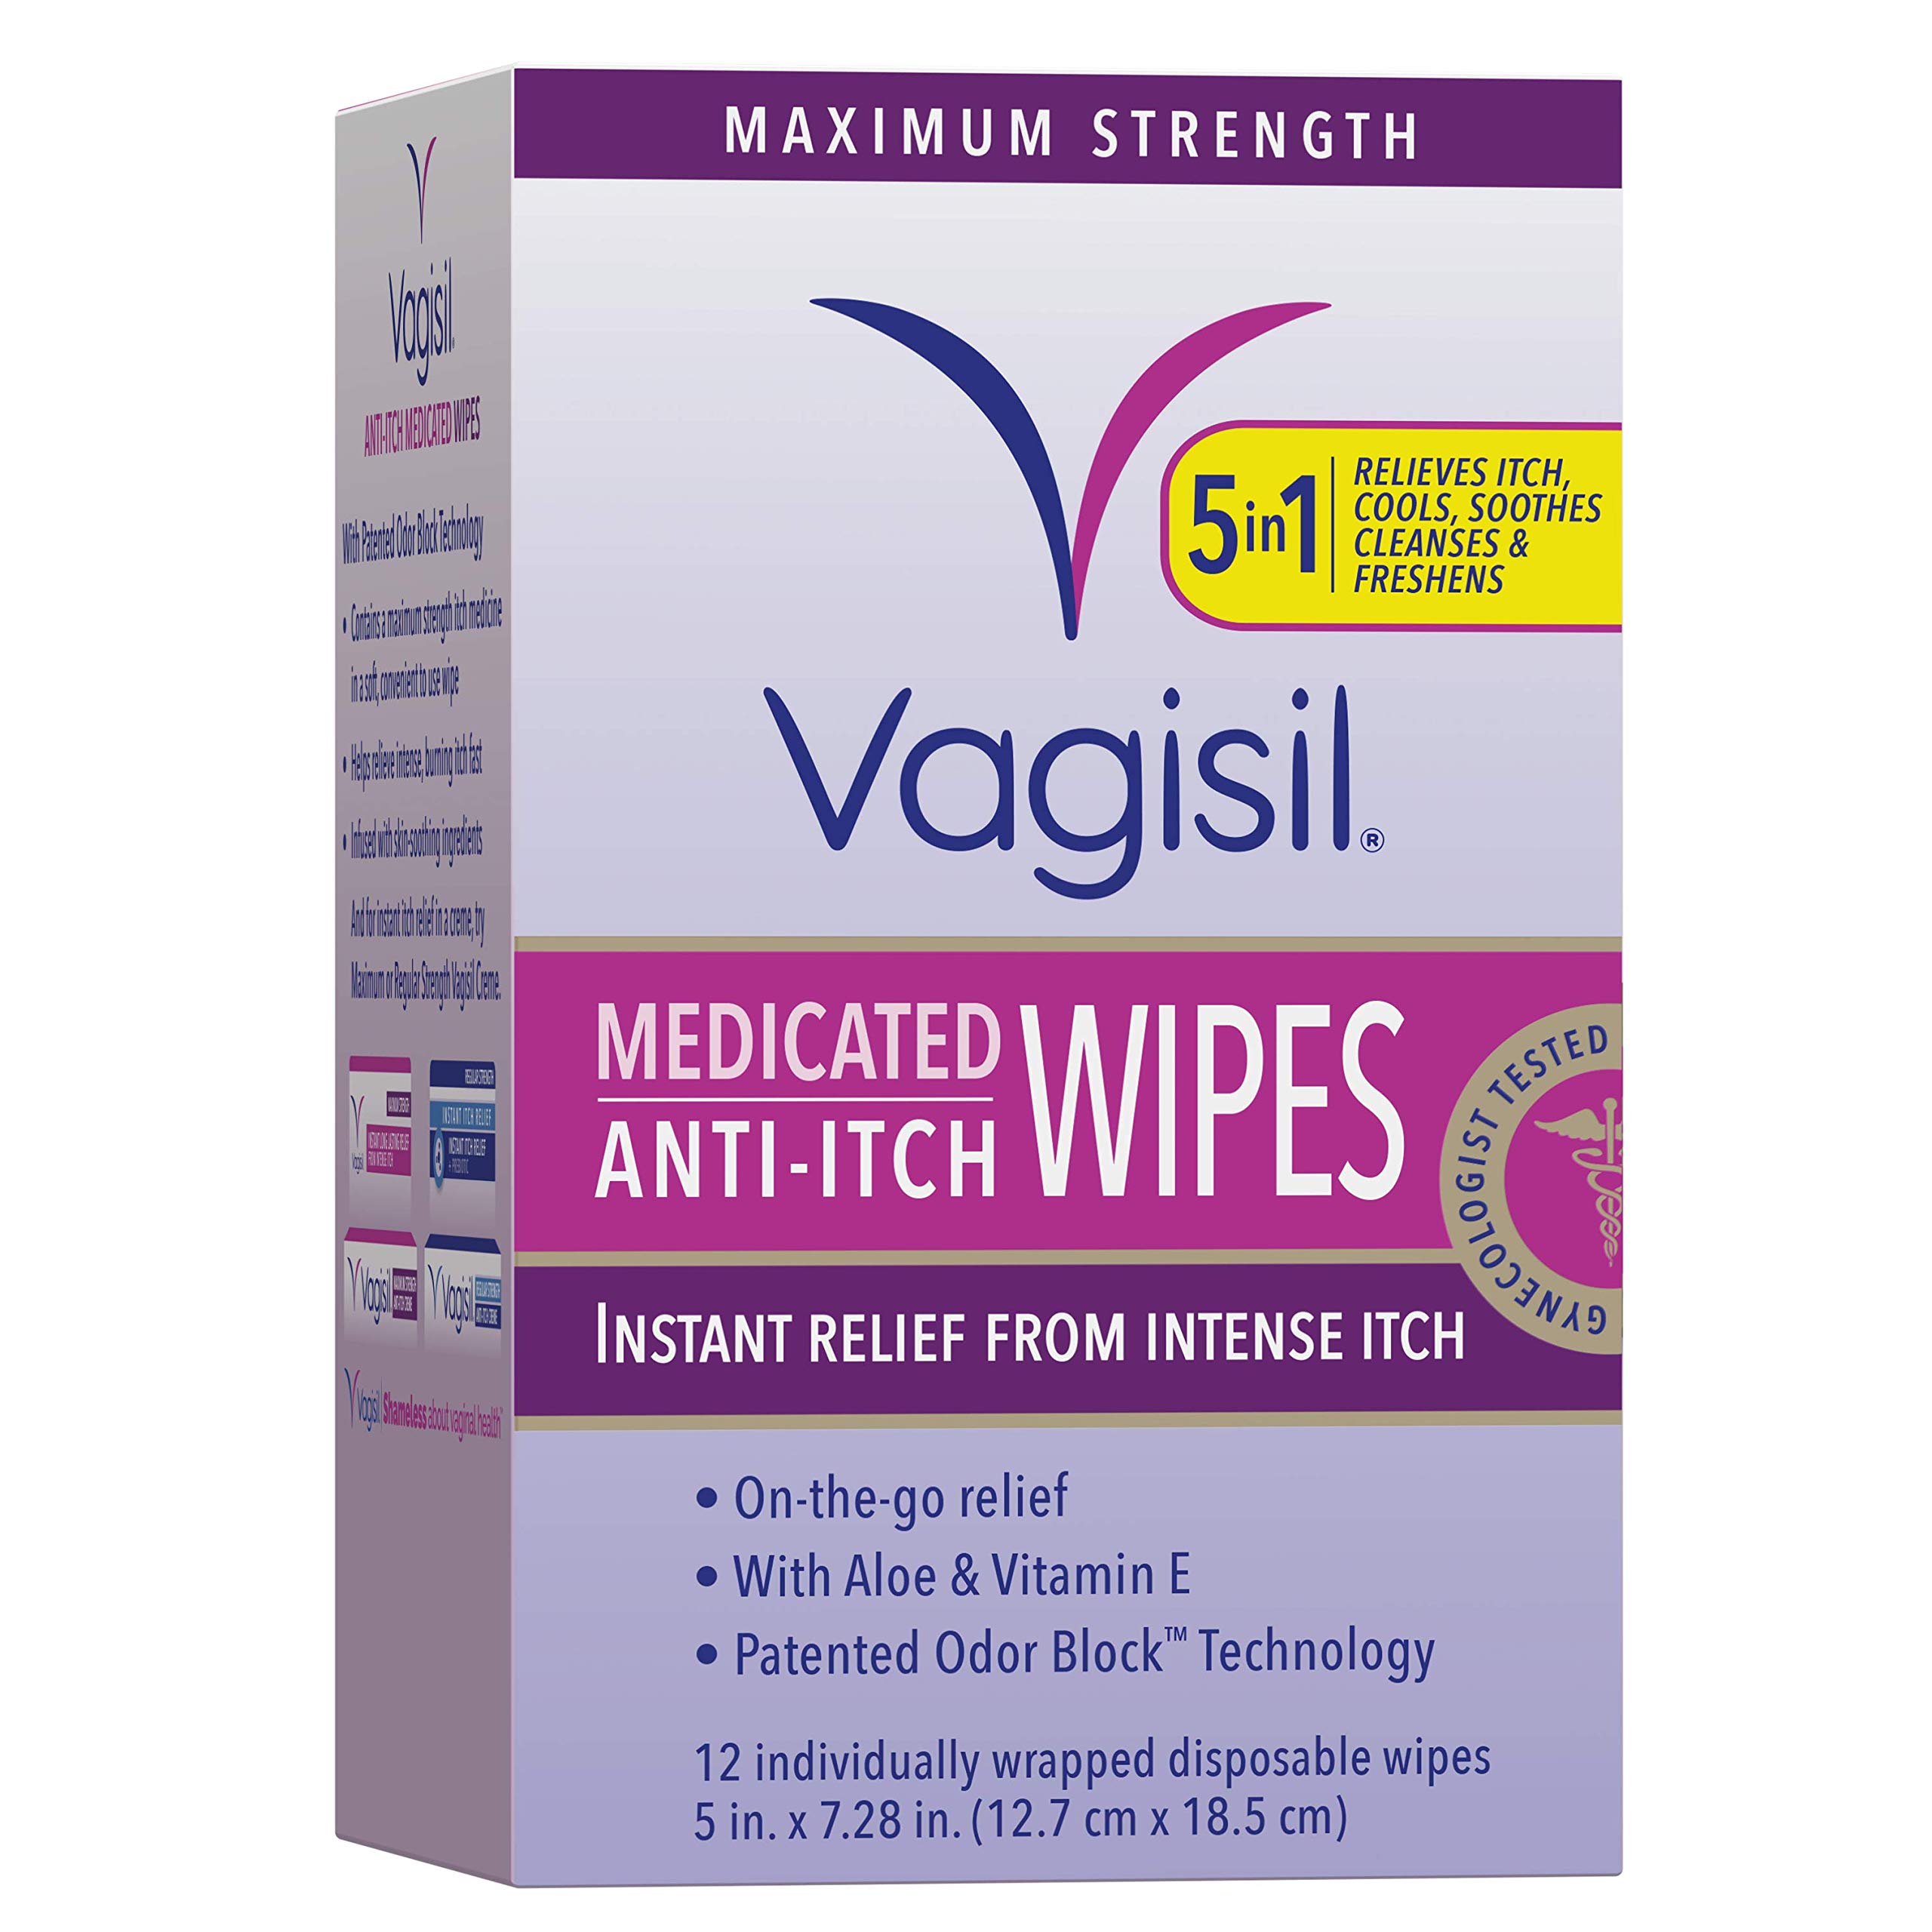 Vagisil Anti-Itch Medicated Feminine Intimate Wipes for Women, Maximum Strength, Gynecologist Tested, 12 Wipes